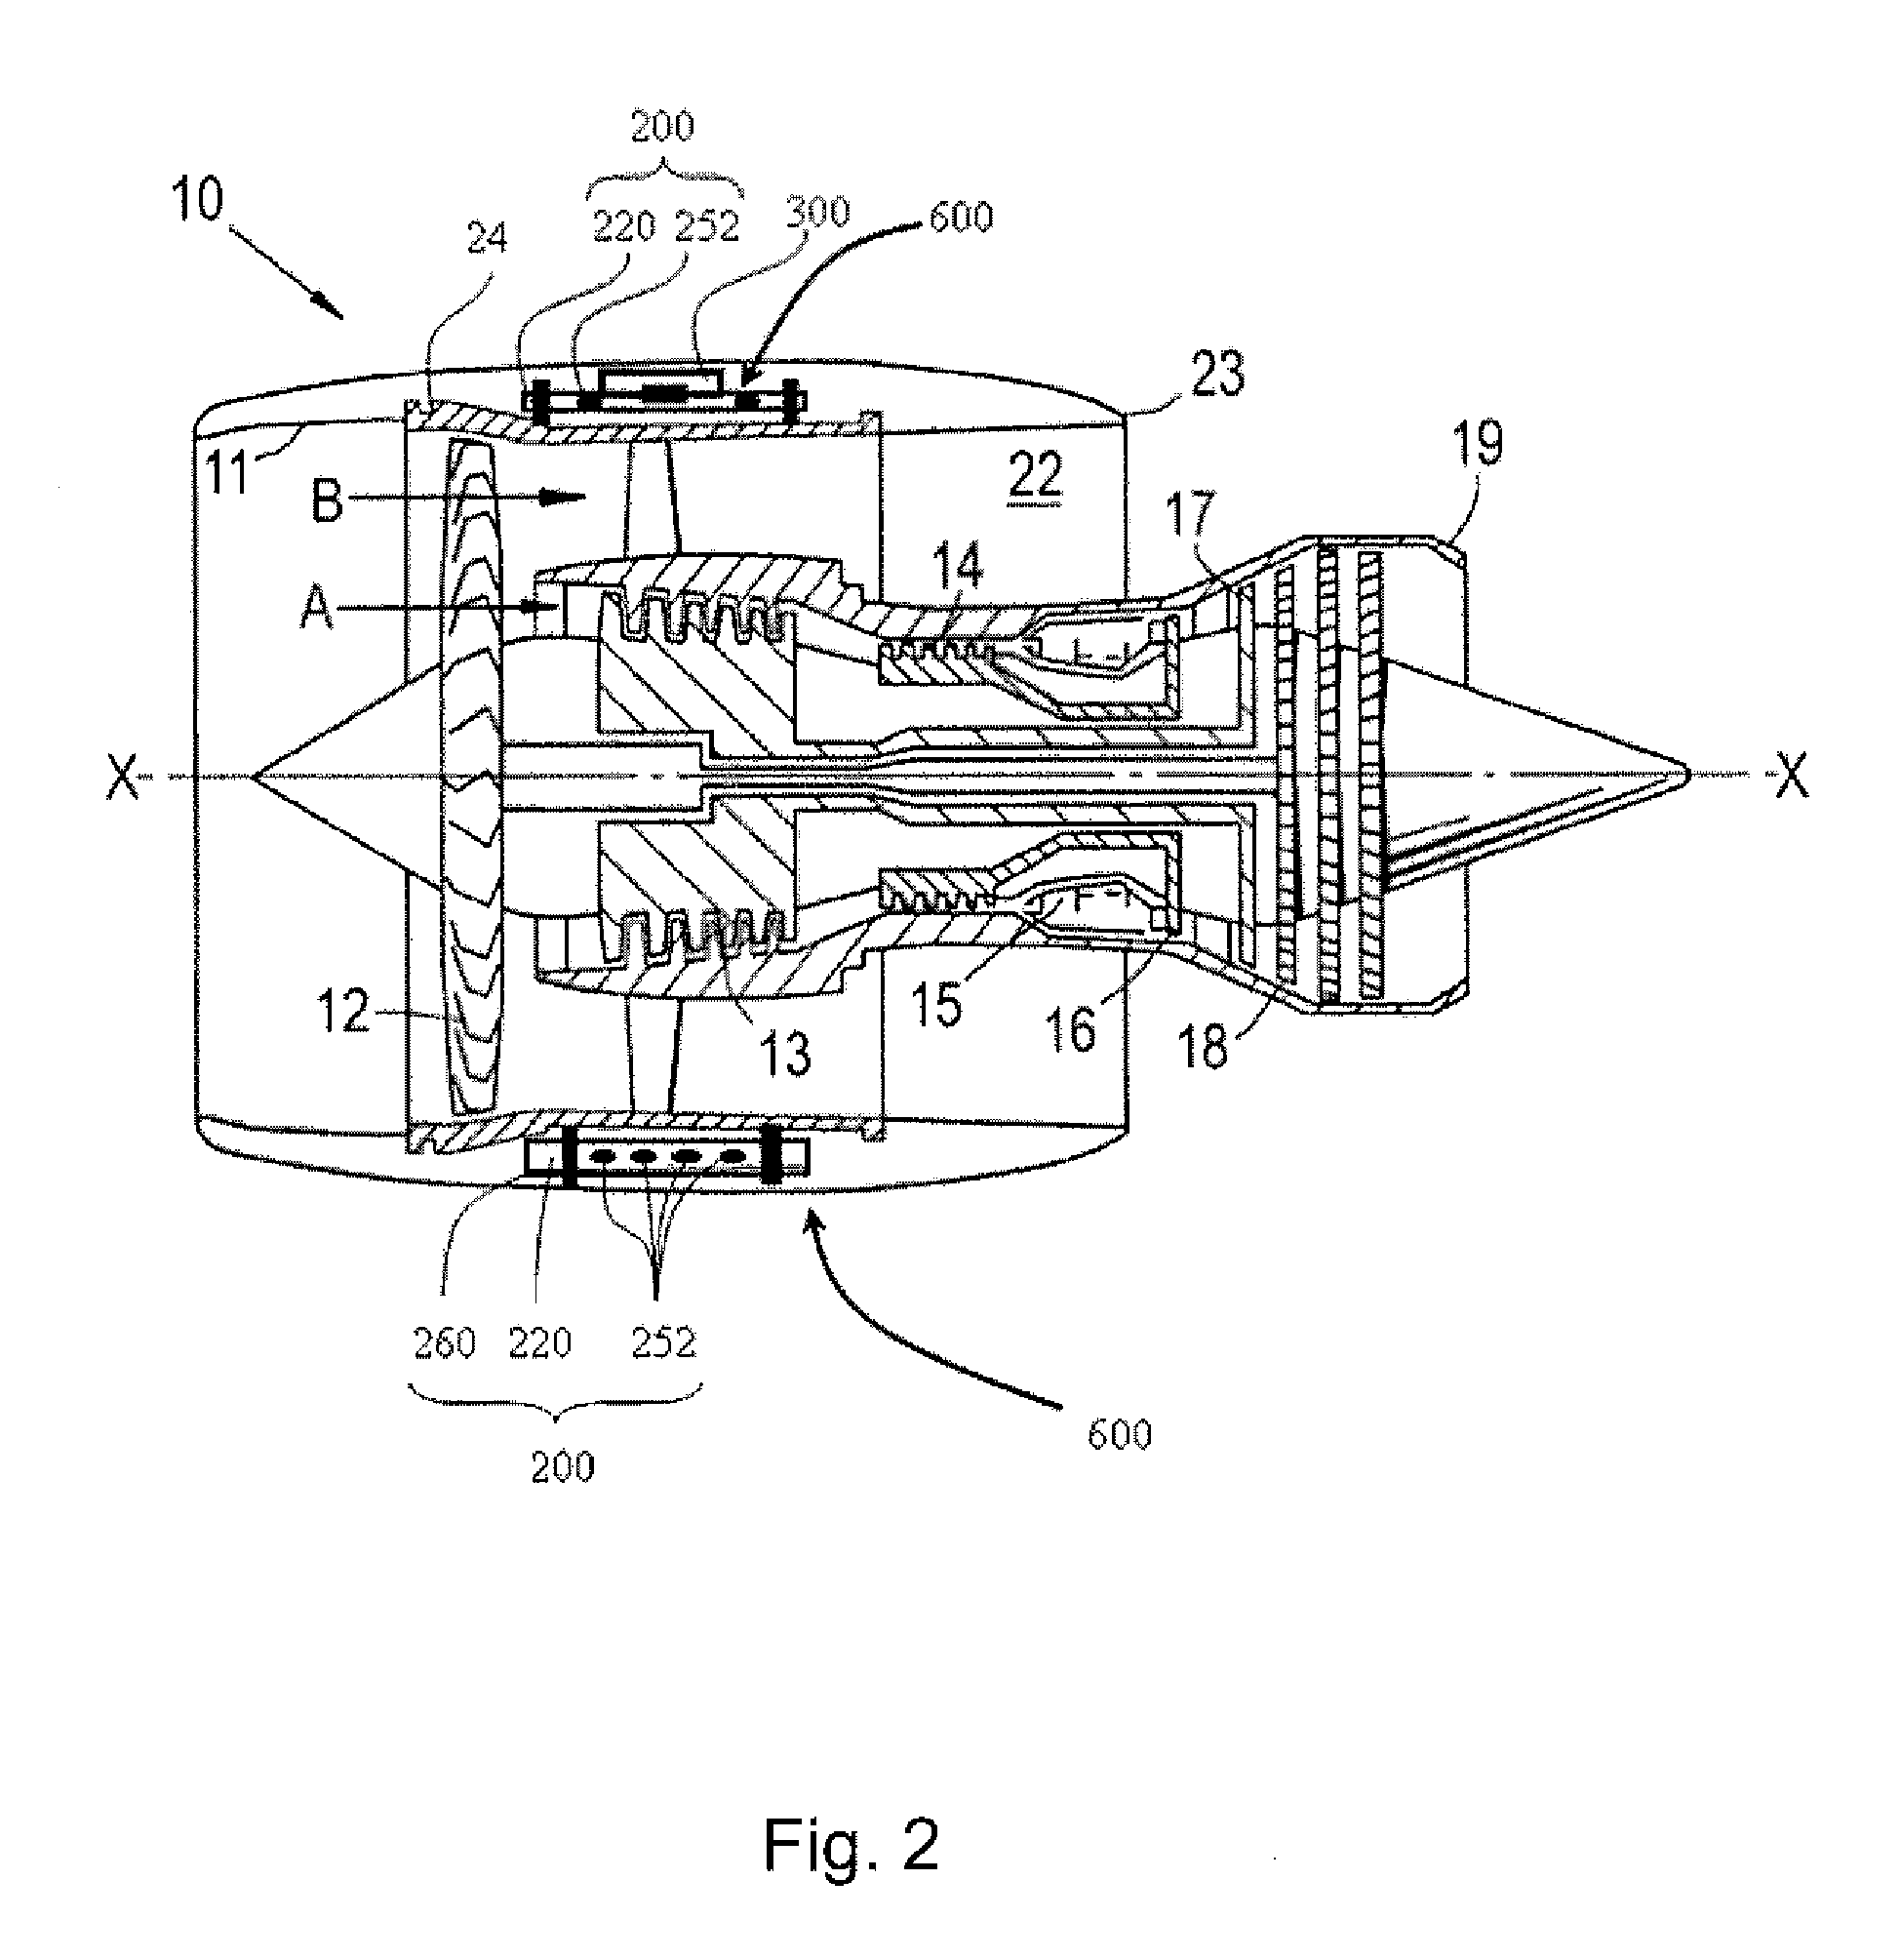 Component having insert for receiving threaded fasteners